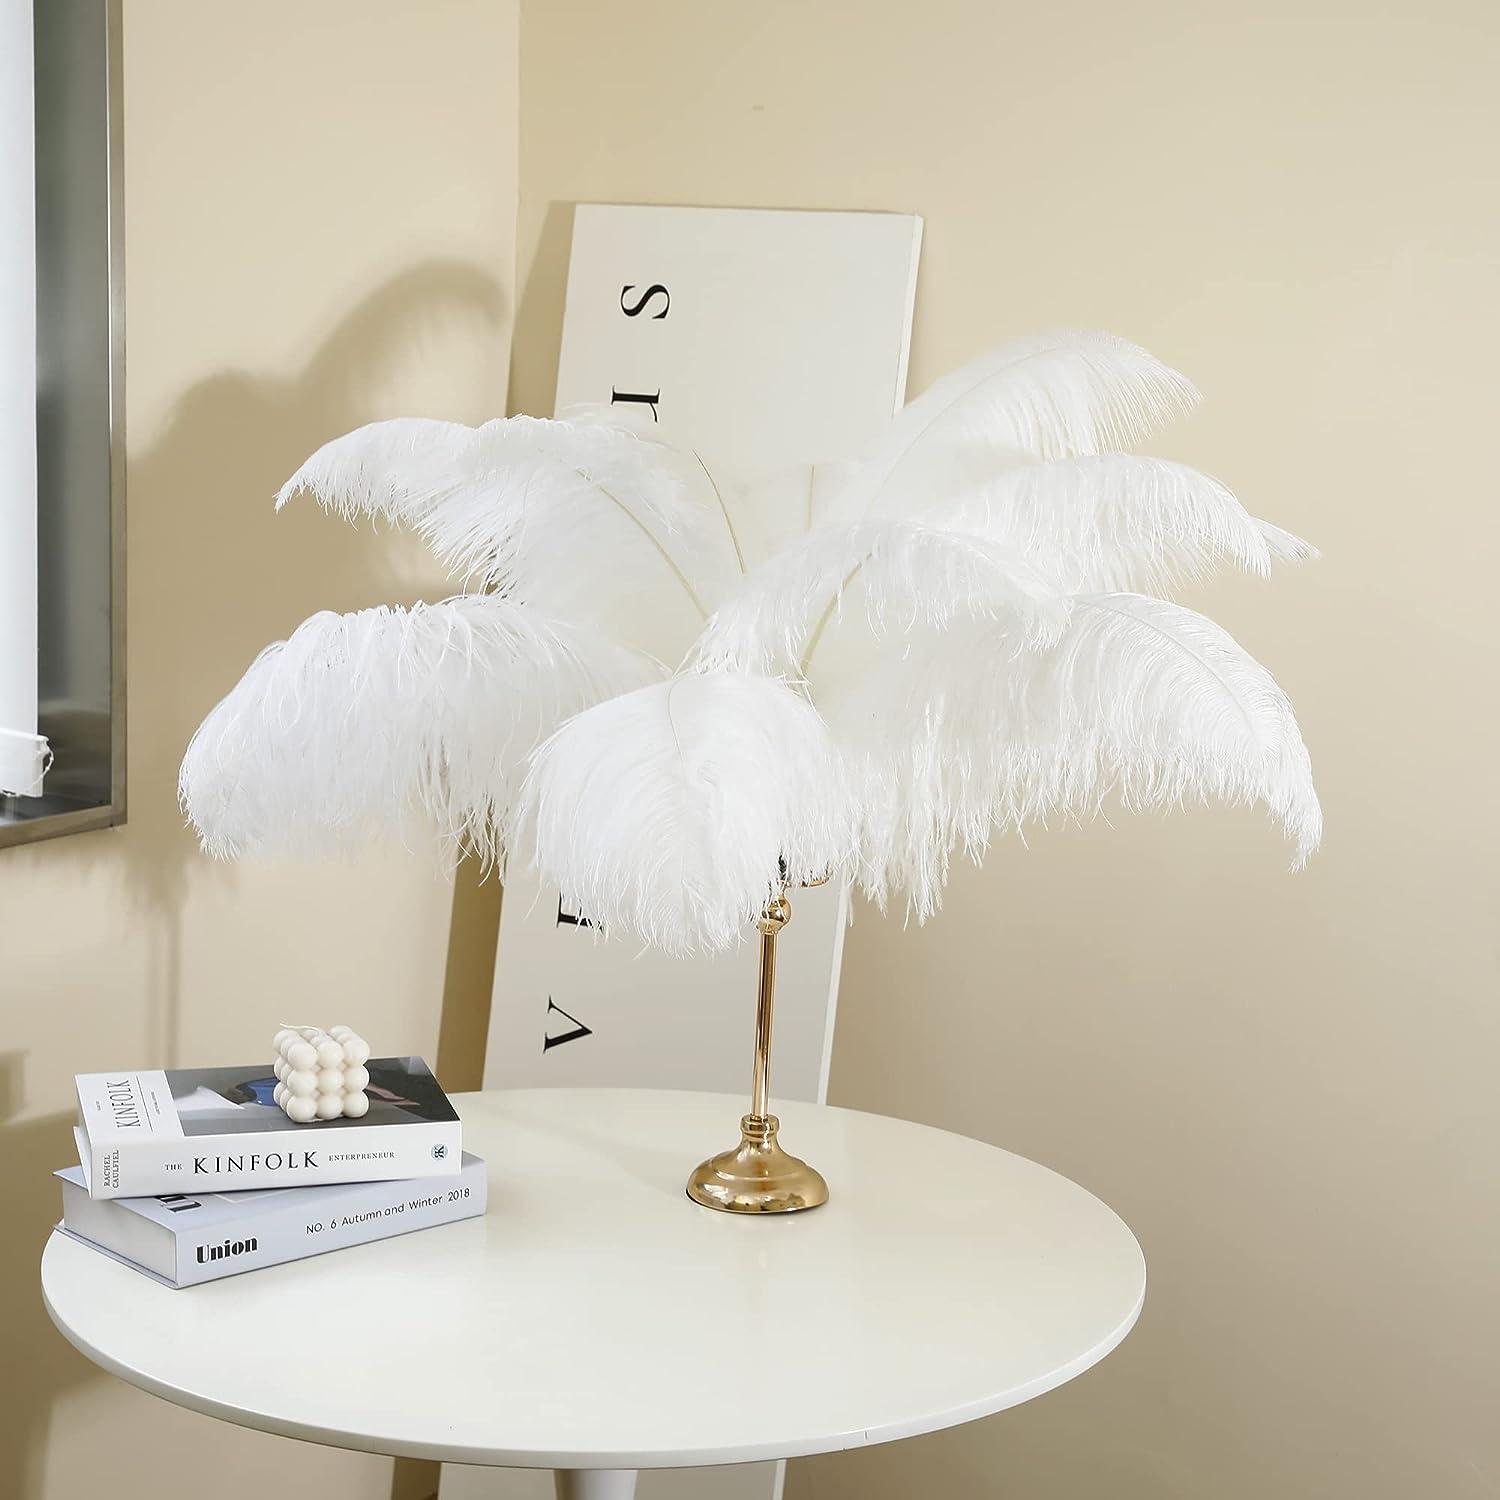 Larryhot White Large Ostrich Feathers - 16-18 inch 10pcs Feathers